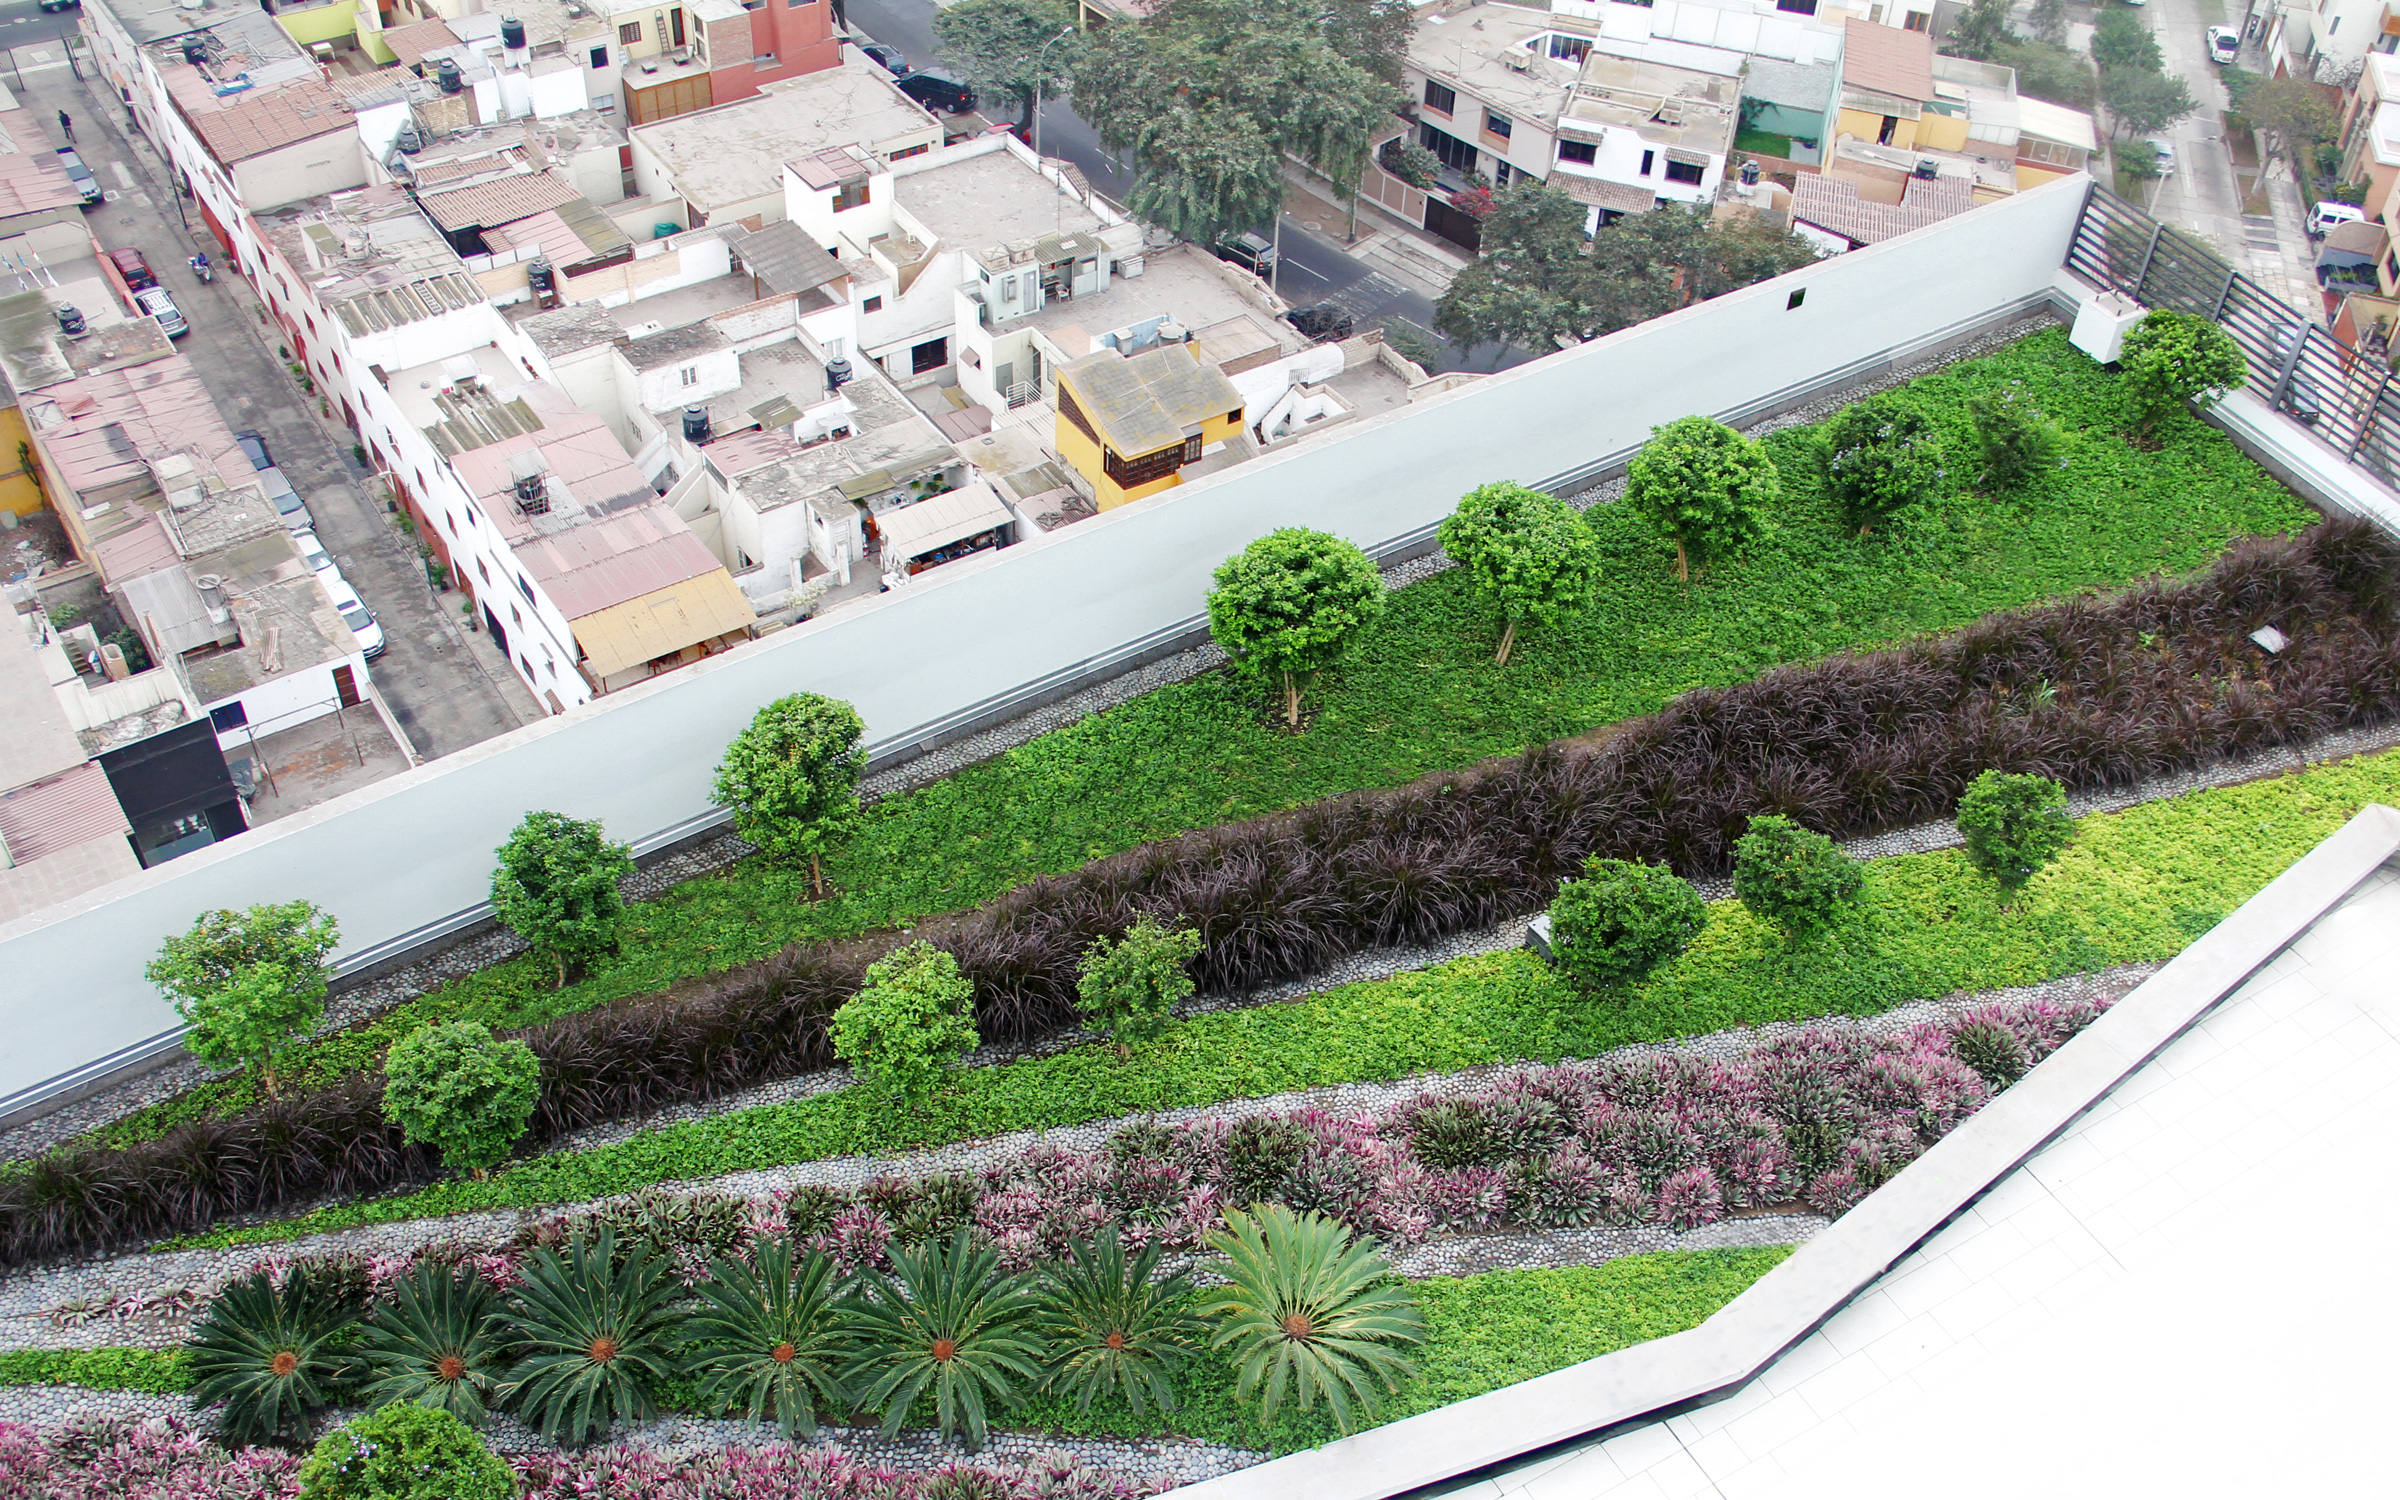 Roof garden with small trees, palm trees, shrubs and ornamental grasses